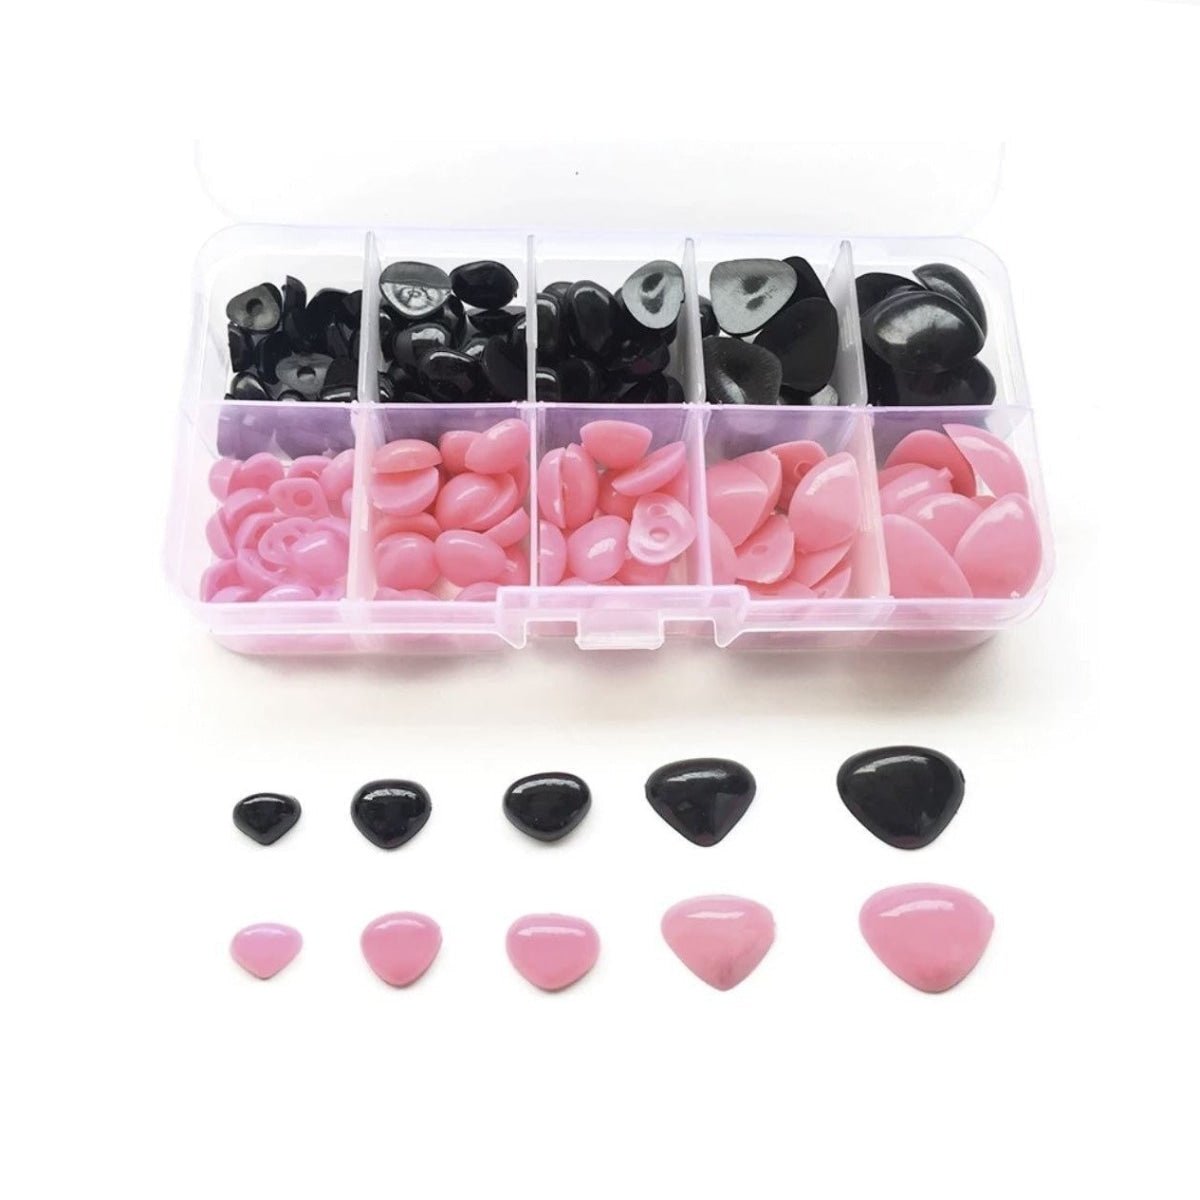 150pcs Set Plastic Toy Noses Triangle Nose Black Brown Pink Bear Puppet Dolls Toy - Black and Pink - - Asia Sell